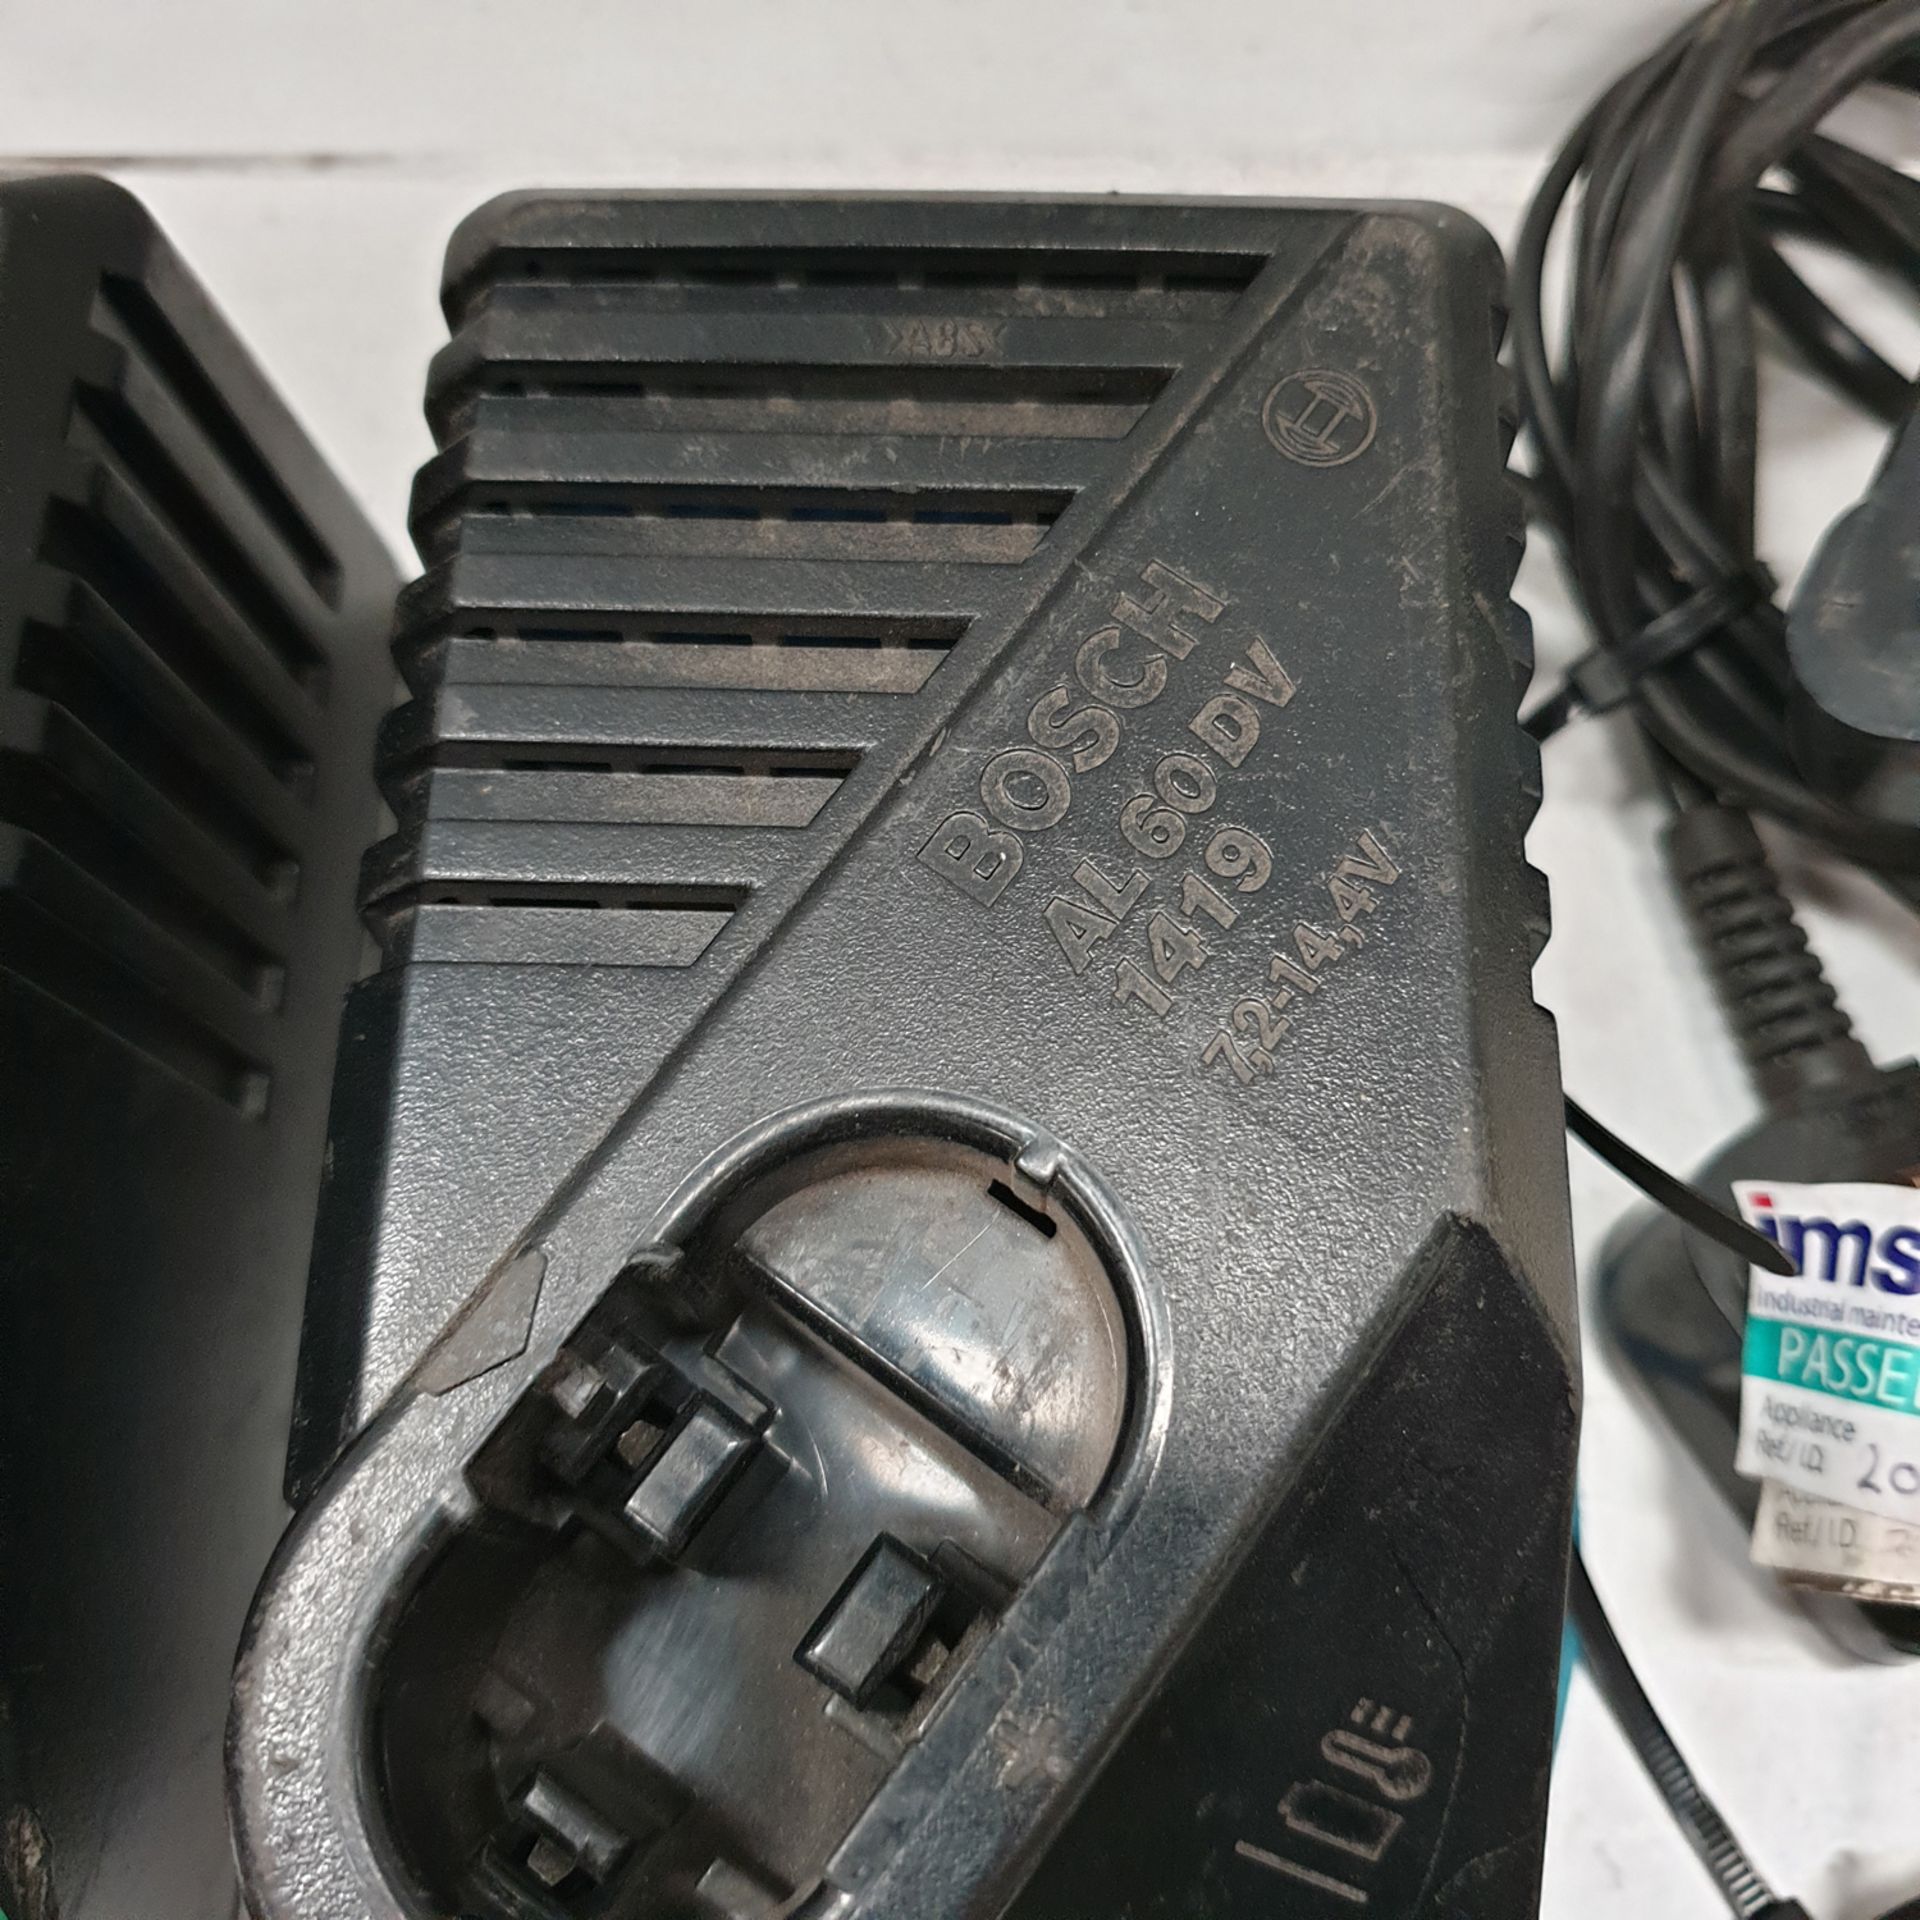 4 x BOSCH AL60DV Battery Chargers. 7.2-14.4 Volts. - Image 4 of 5